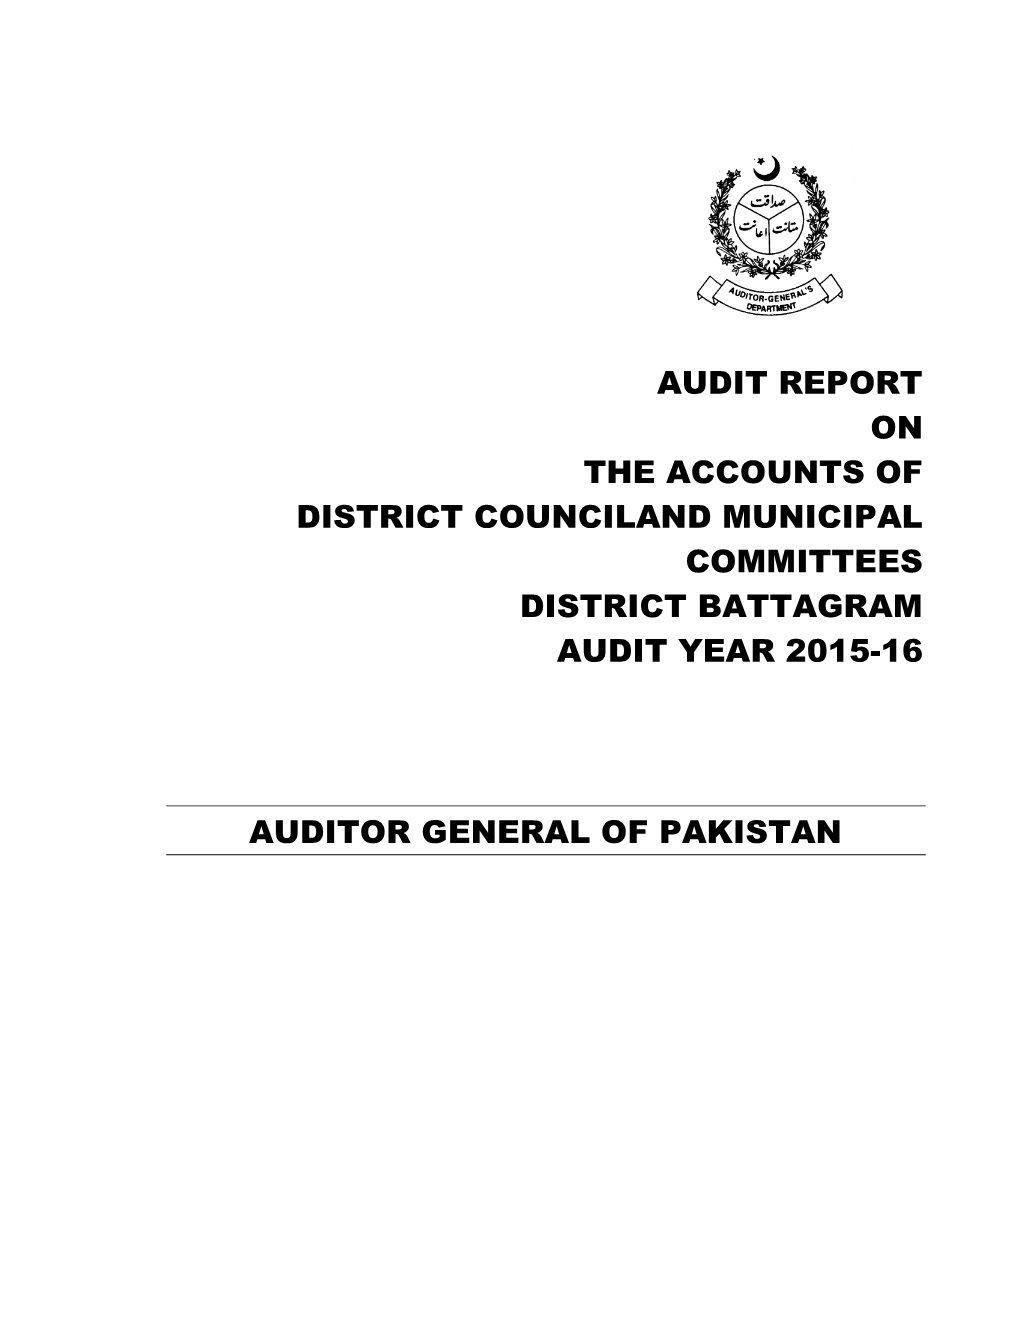 Audit Report on the Accounts of District Counciland Municipal Committees District Battagram Audit Year 2015-16